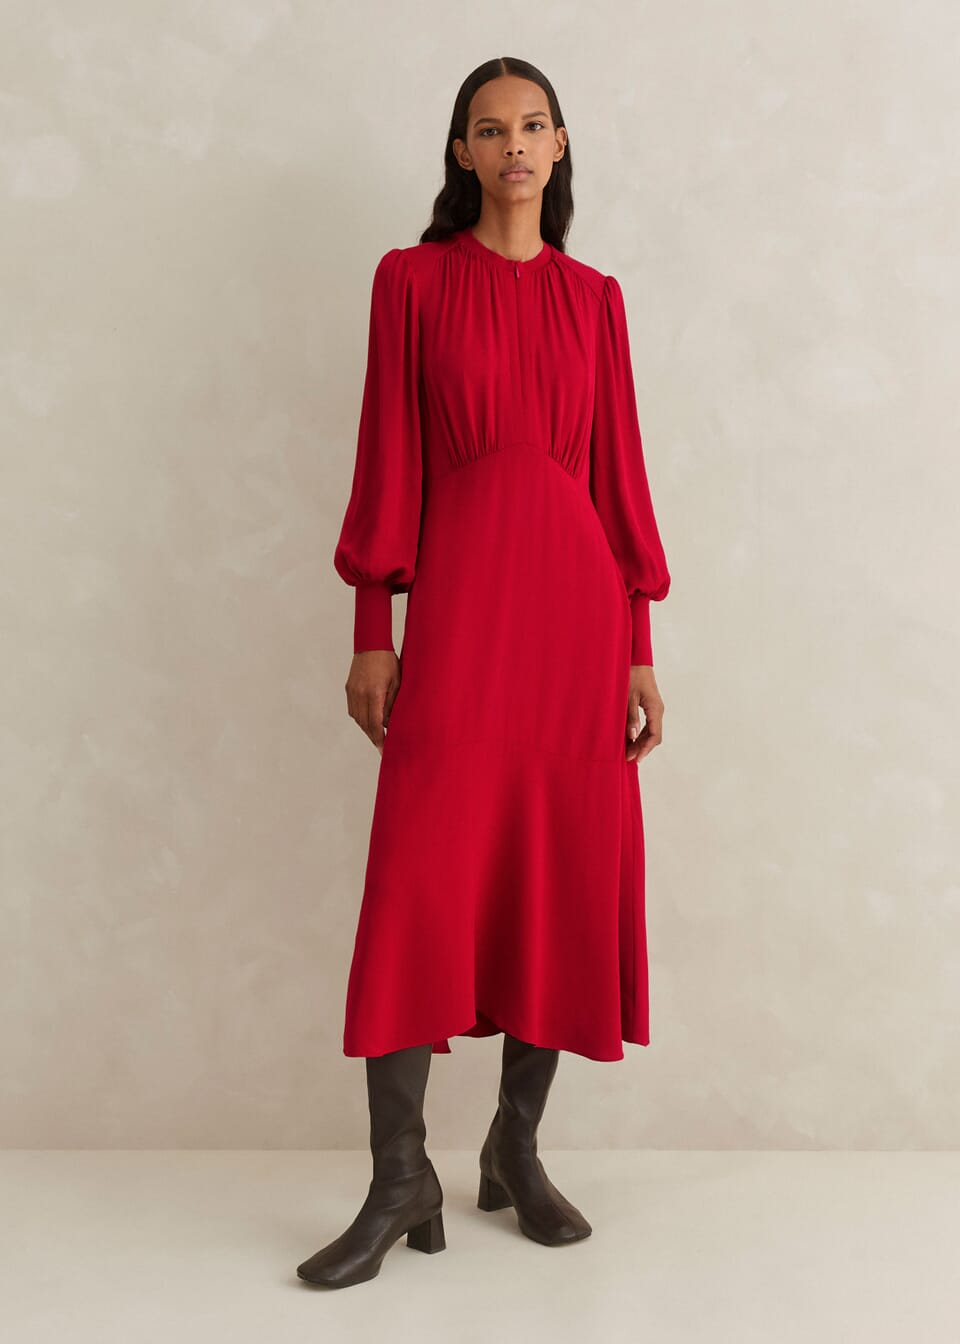 An elegant silhouette meets a statement scarlet shade to create this panelled midi dress. Crafted from modern crepe with a flattering fluid drape, it's an effortless office and occasionwear solution.